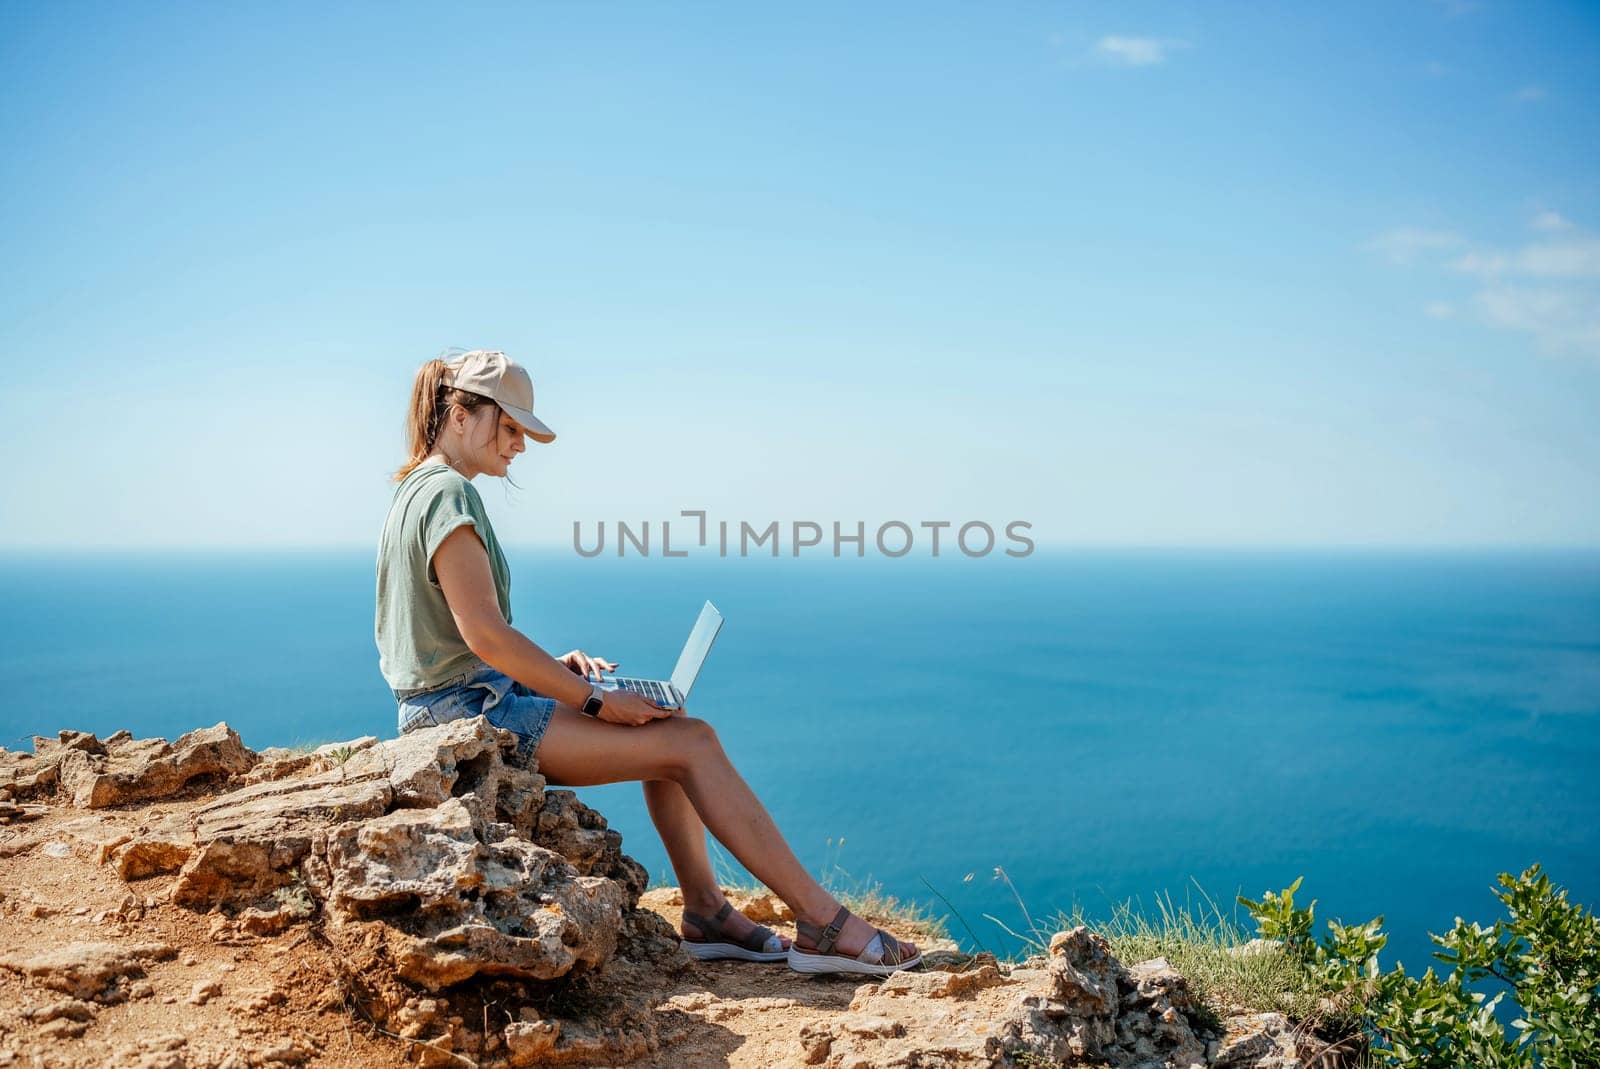 A woman is sitting on a rock overlooking the ocean with a laptop in front of her. She is working or studying, as she is focused on her laptop. Concept of solitude and tranquility